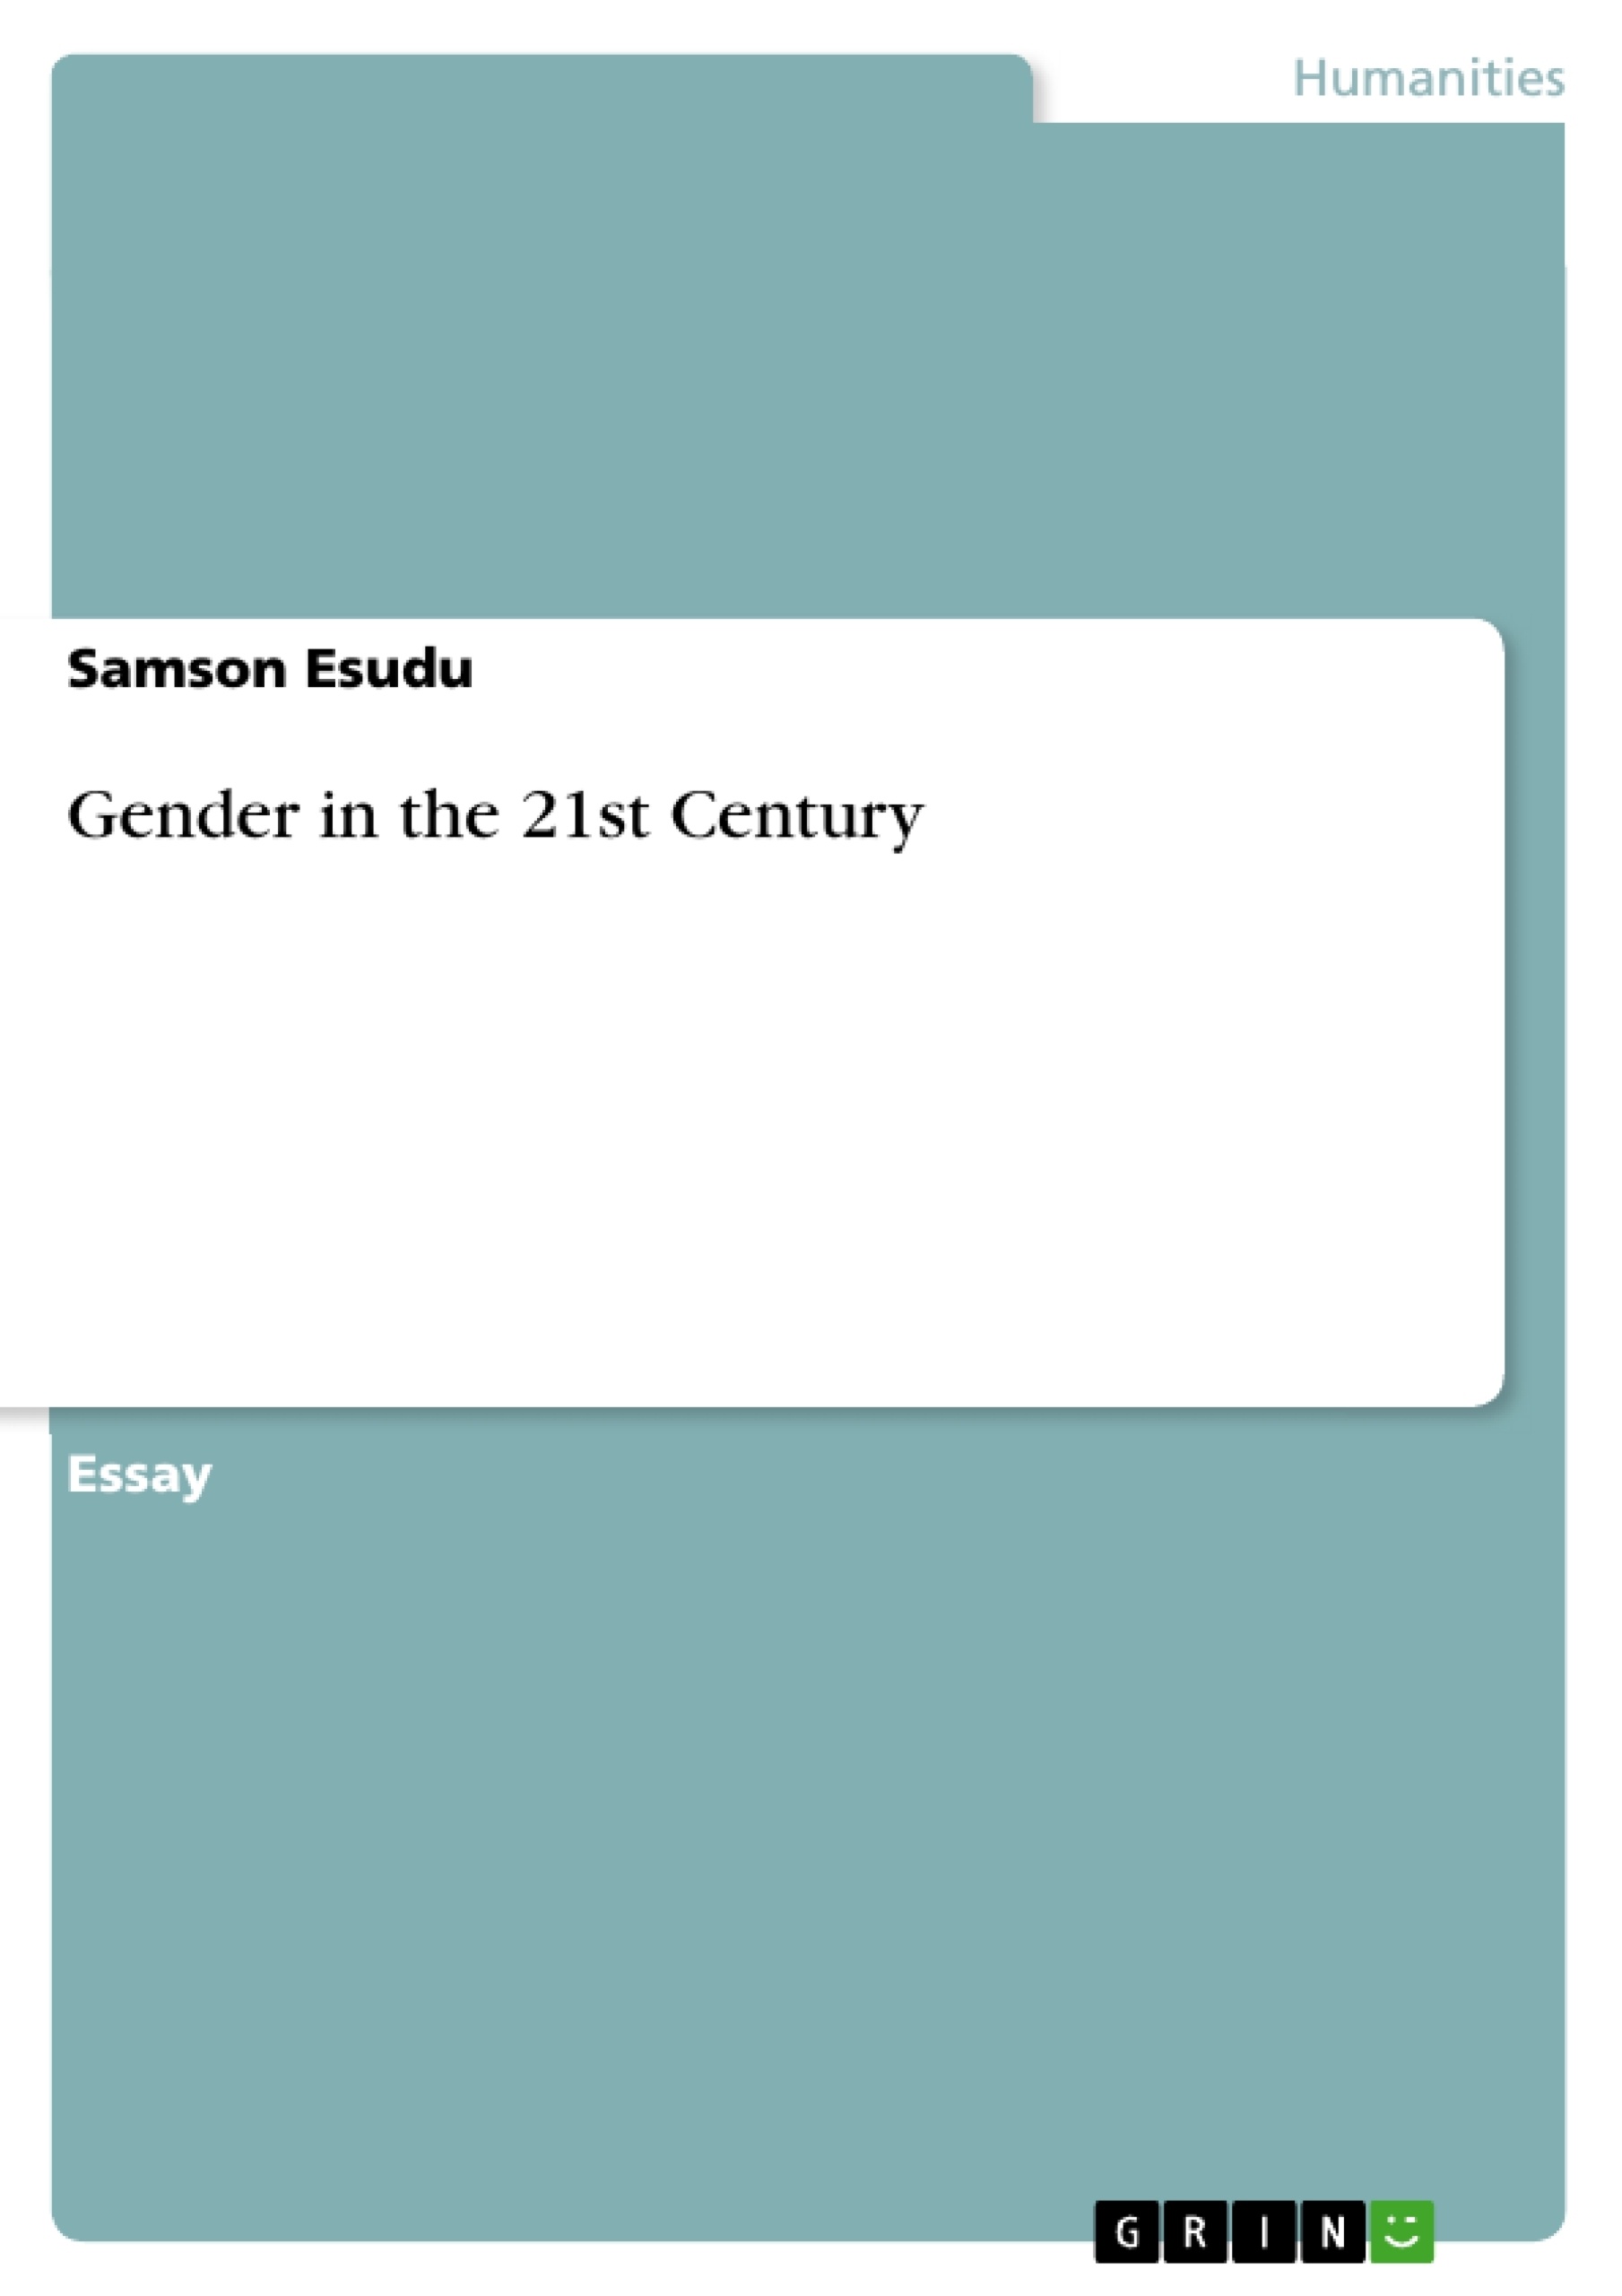 Title: Gender in the 21st Century